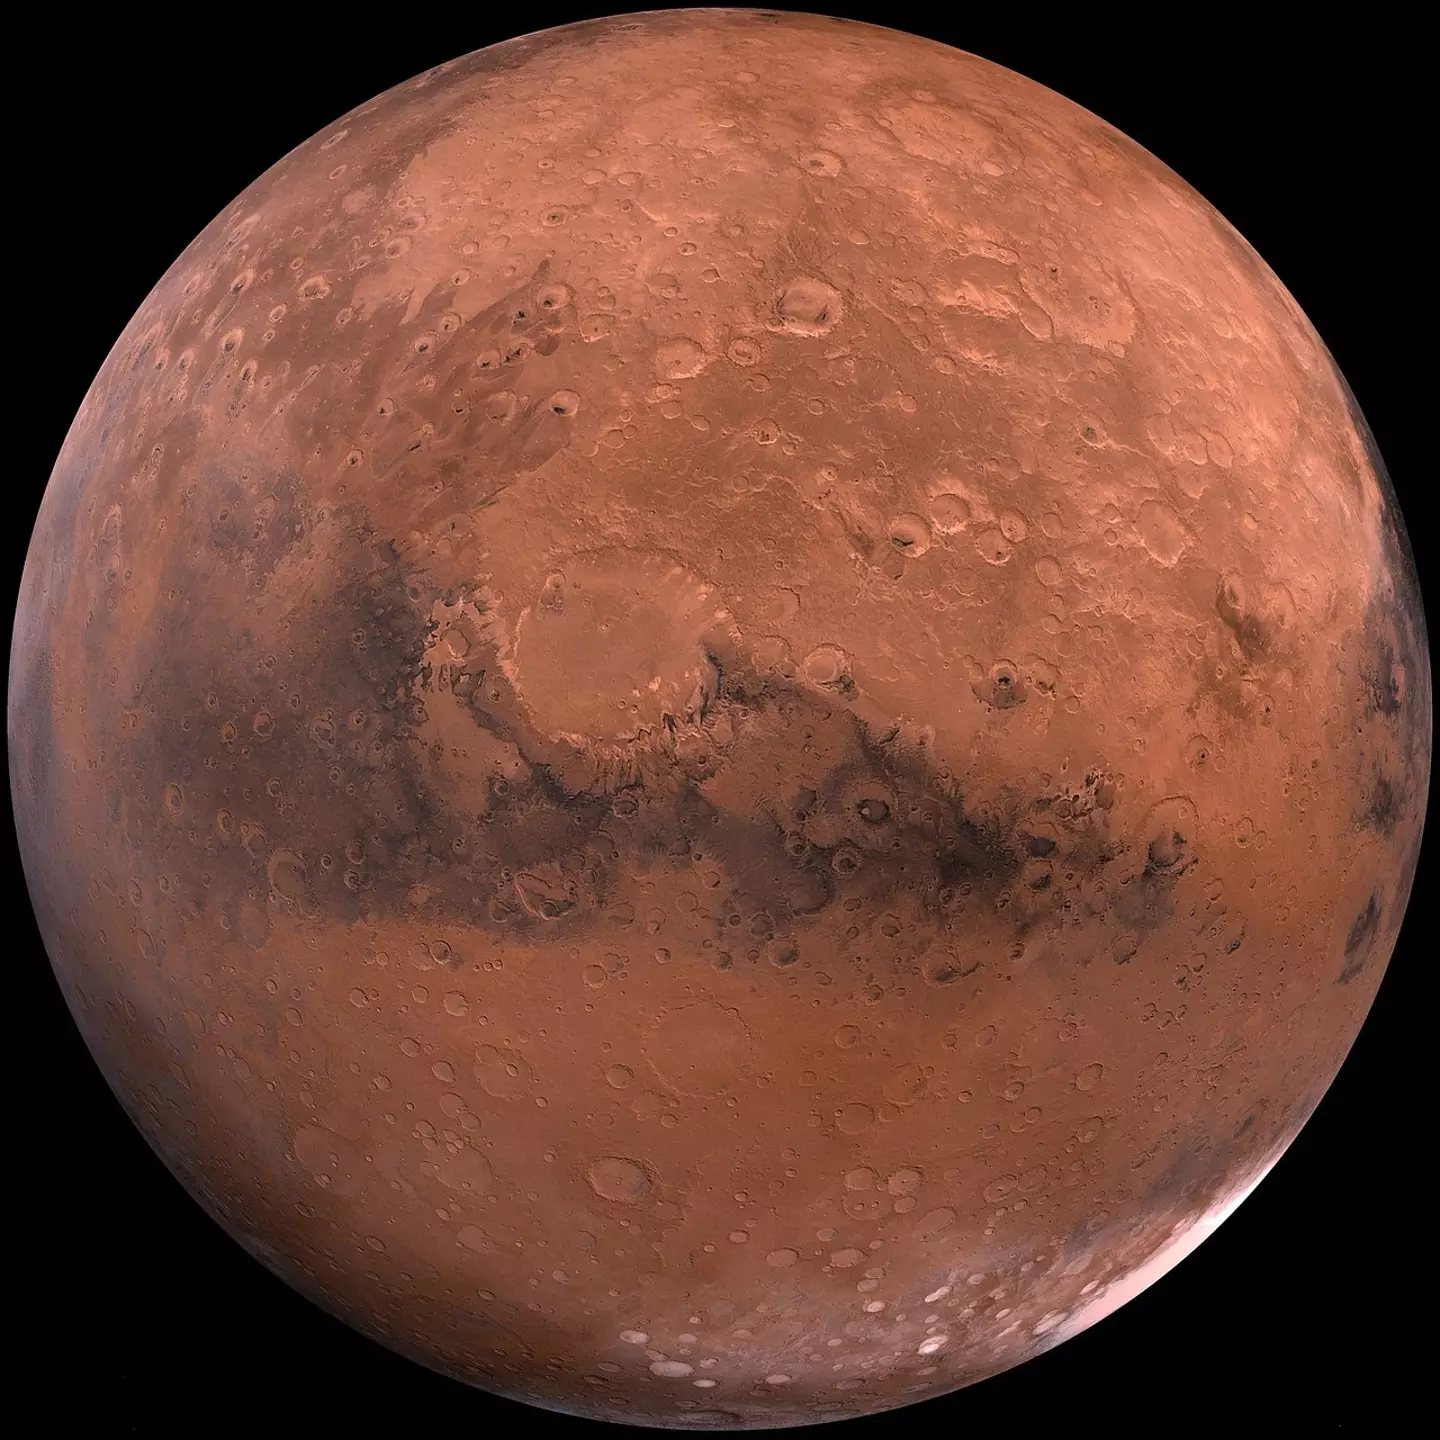 There's plans for humans to travel to Mars in the 2030s.